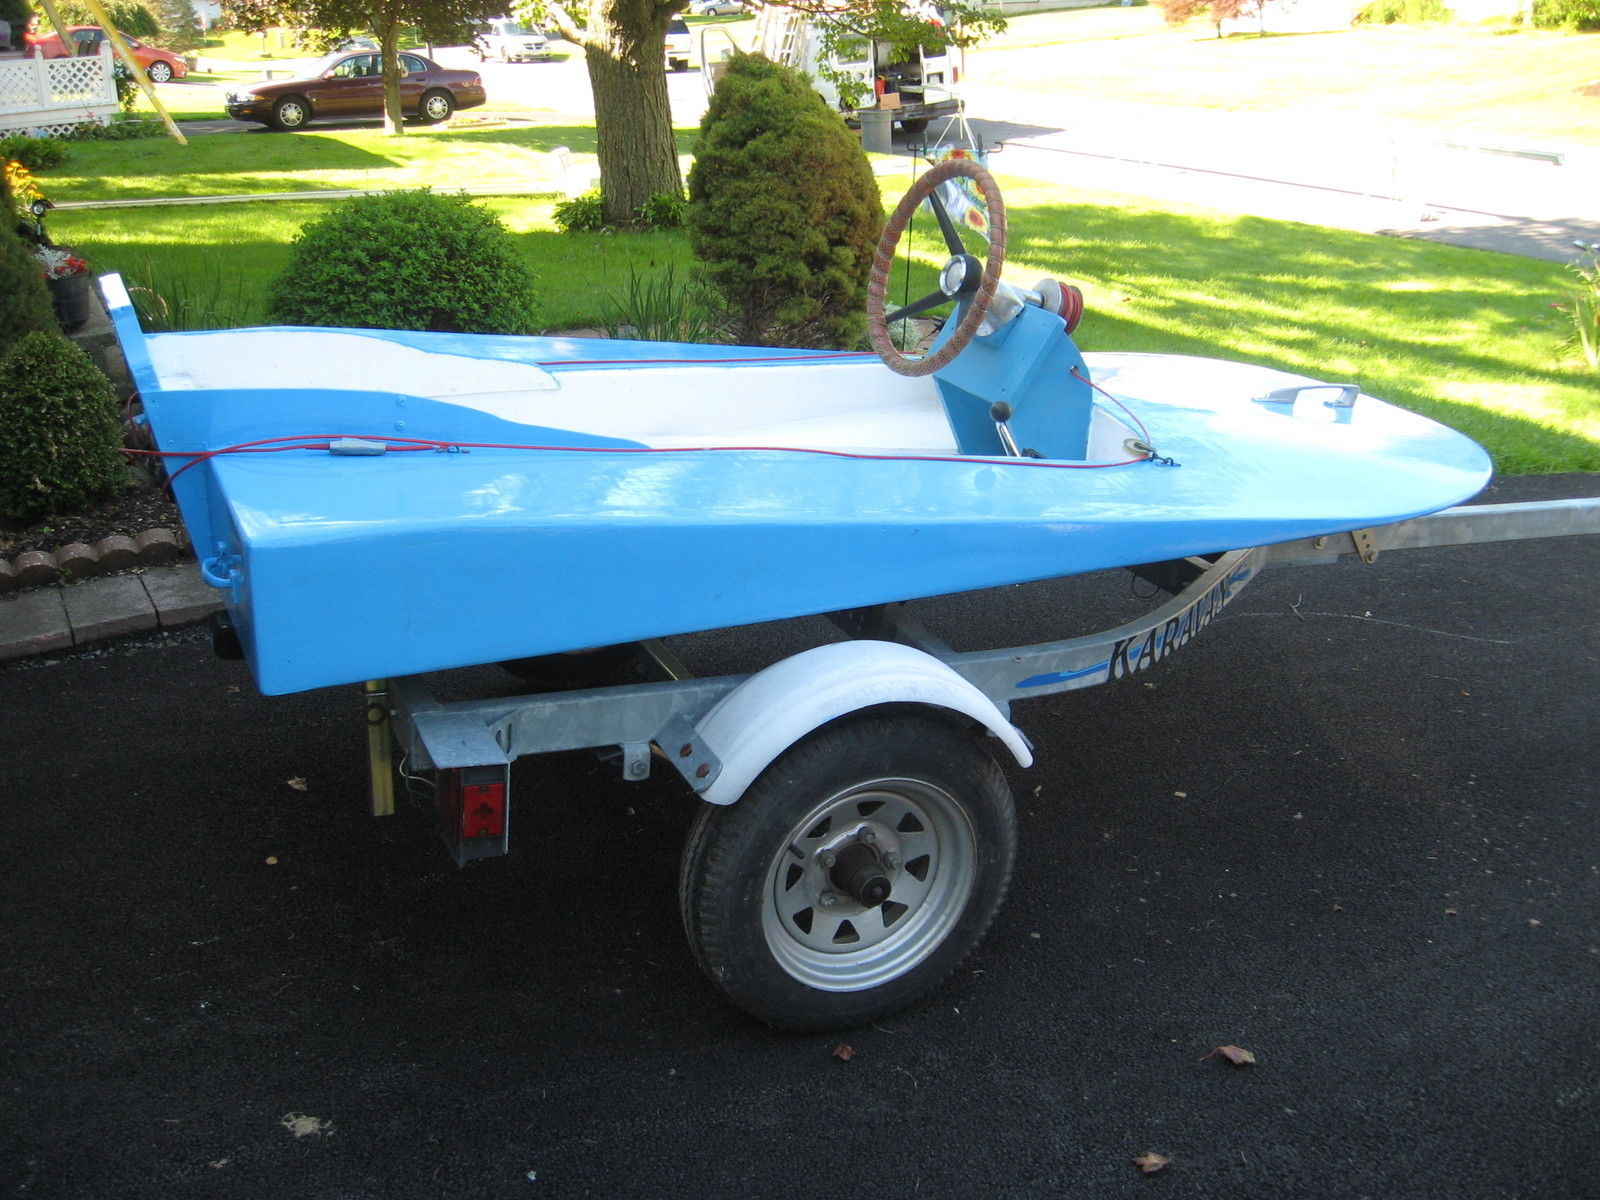 Home Built Mini Max Hydroplane 2010 for sale for $550 